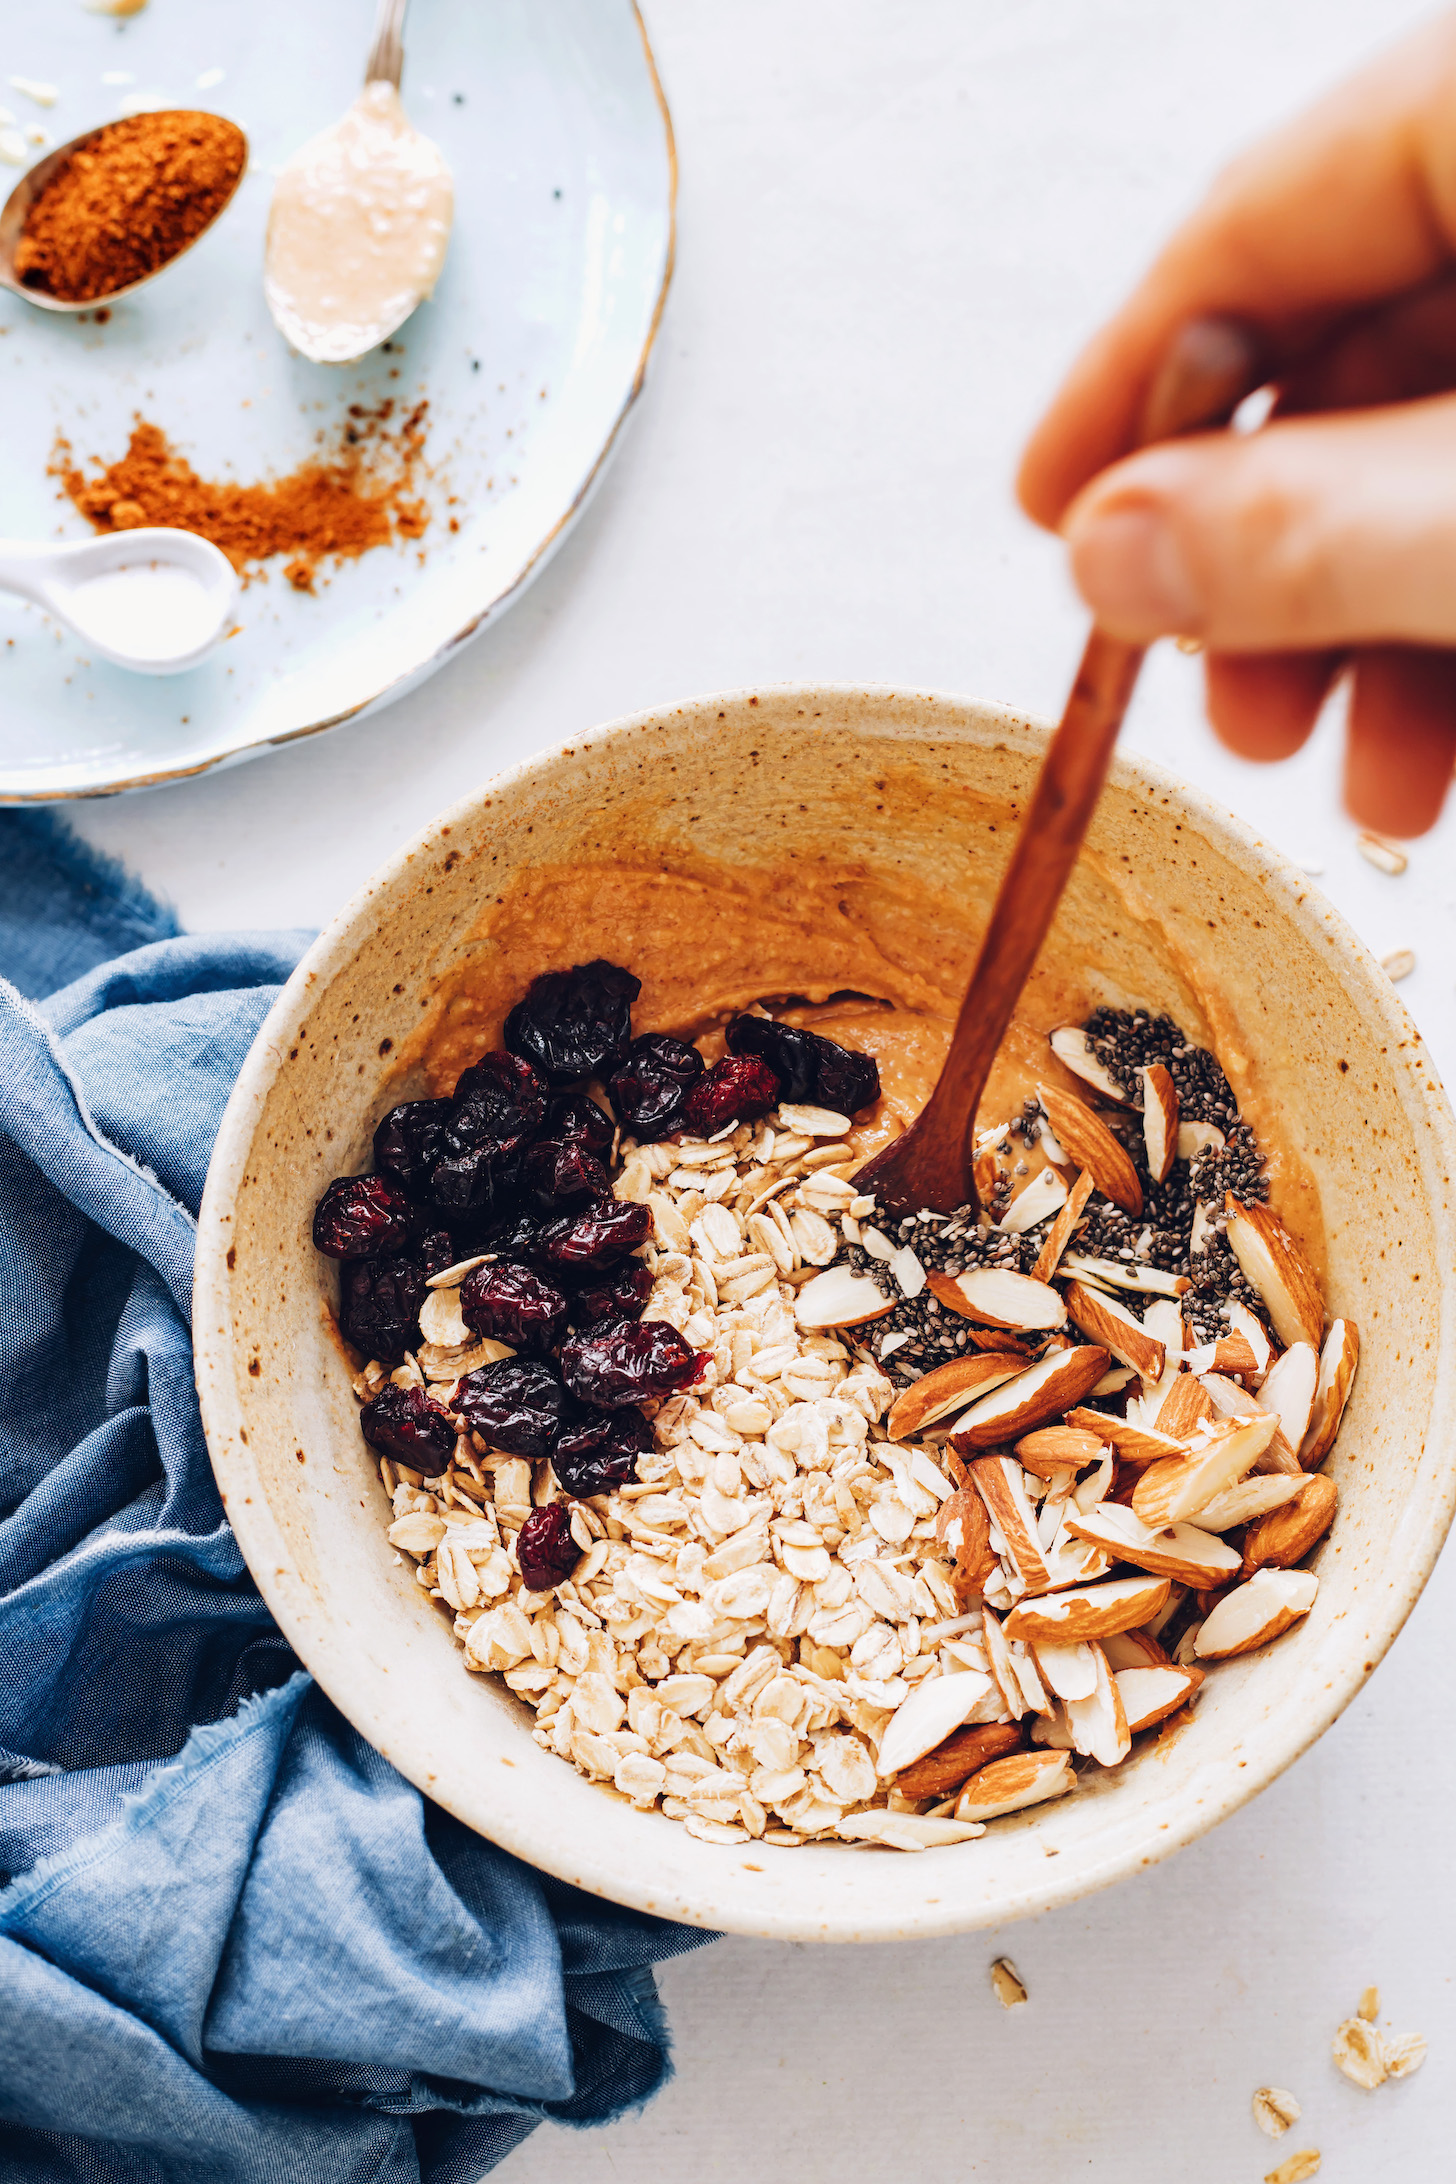 Oats, almonds, chia seeds, and dried cherries in a bowl with the wet ingredients